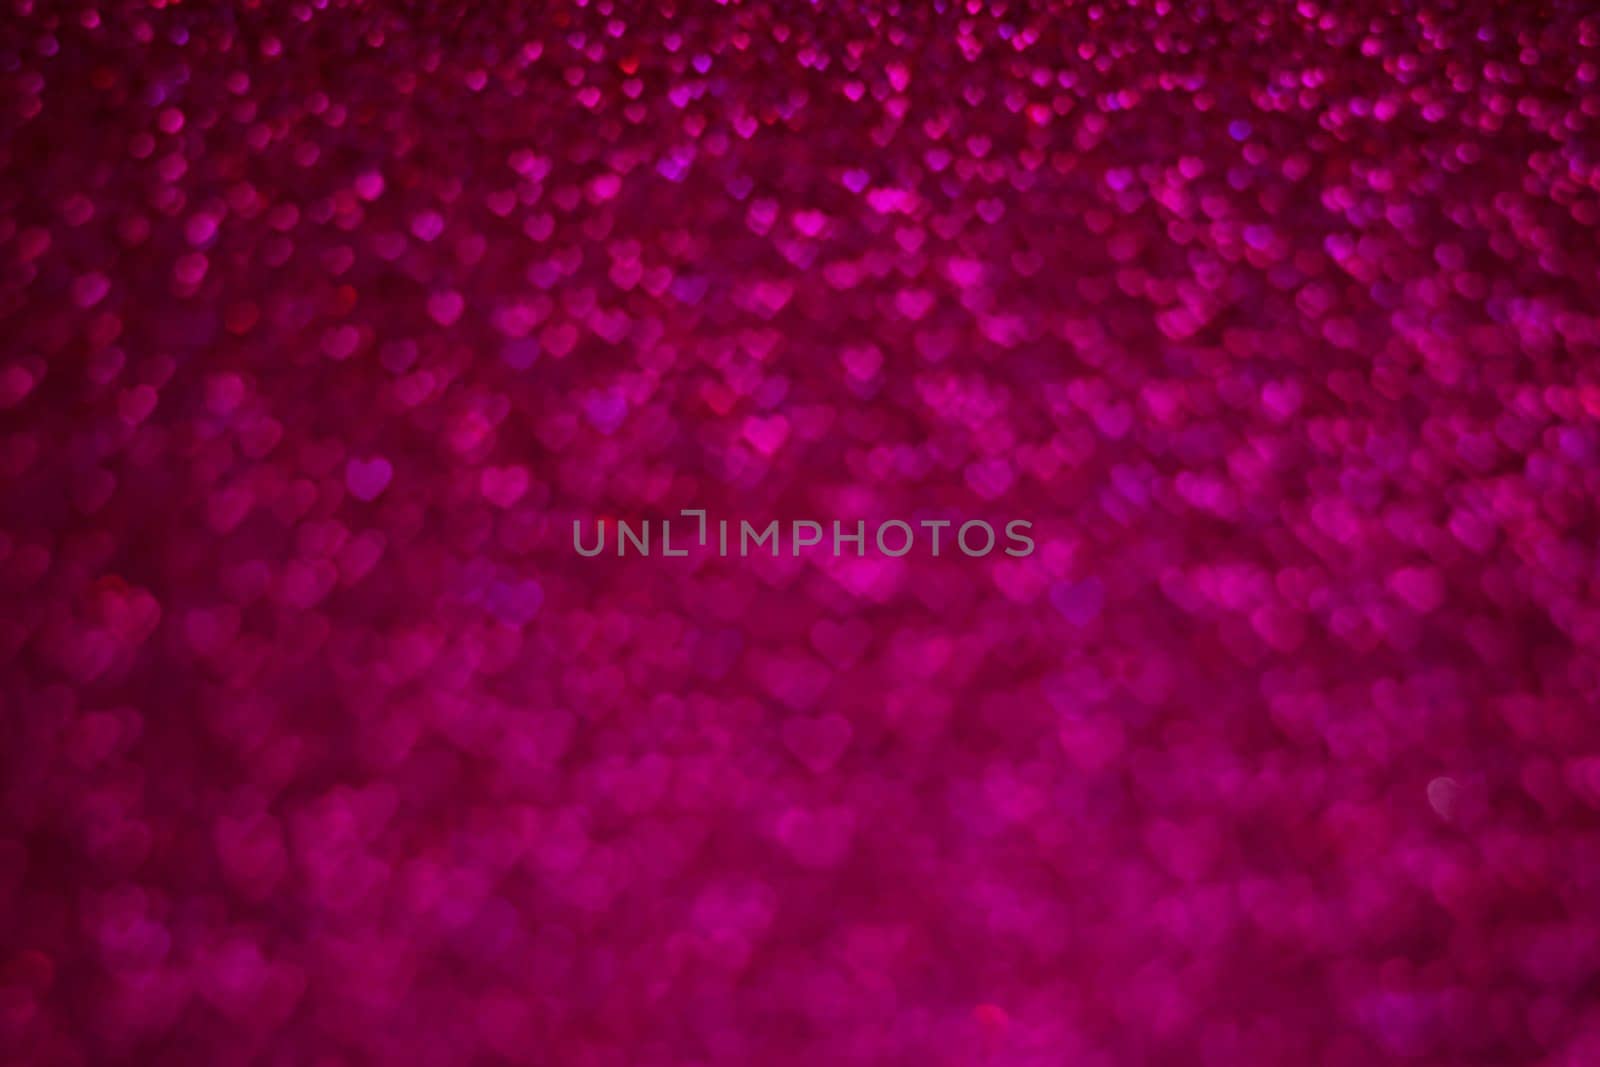 A close up of a pink background with many small hearts scattered throughout by Alla_Morozova93